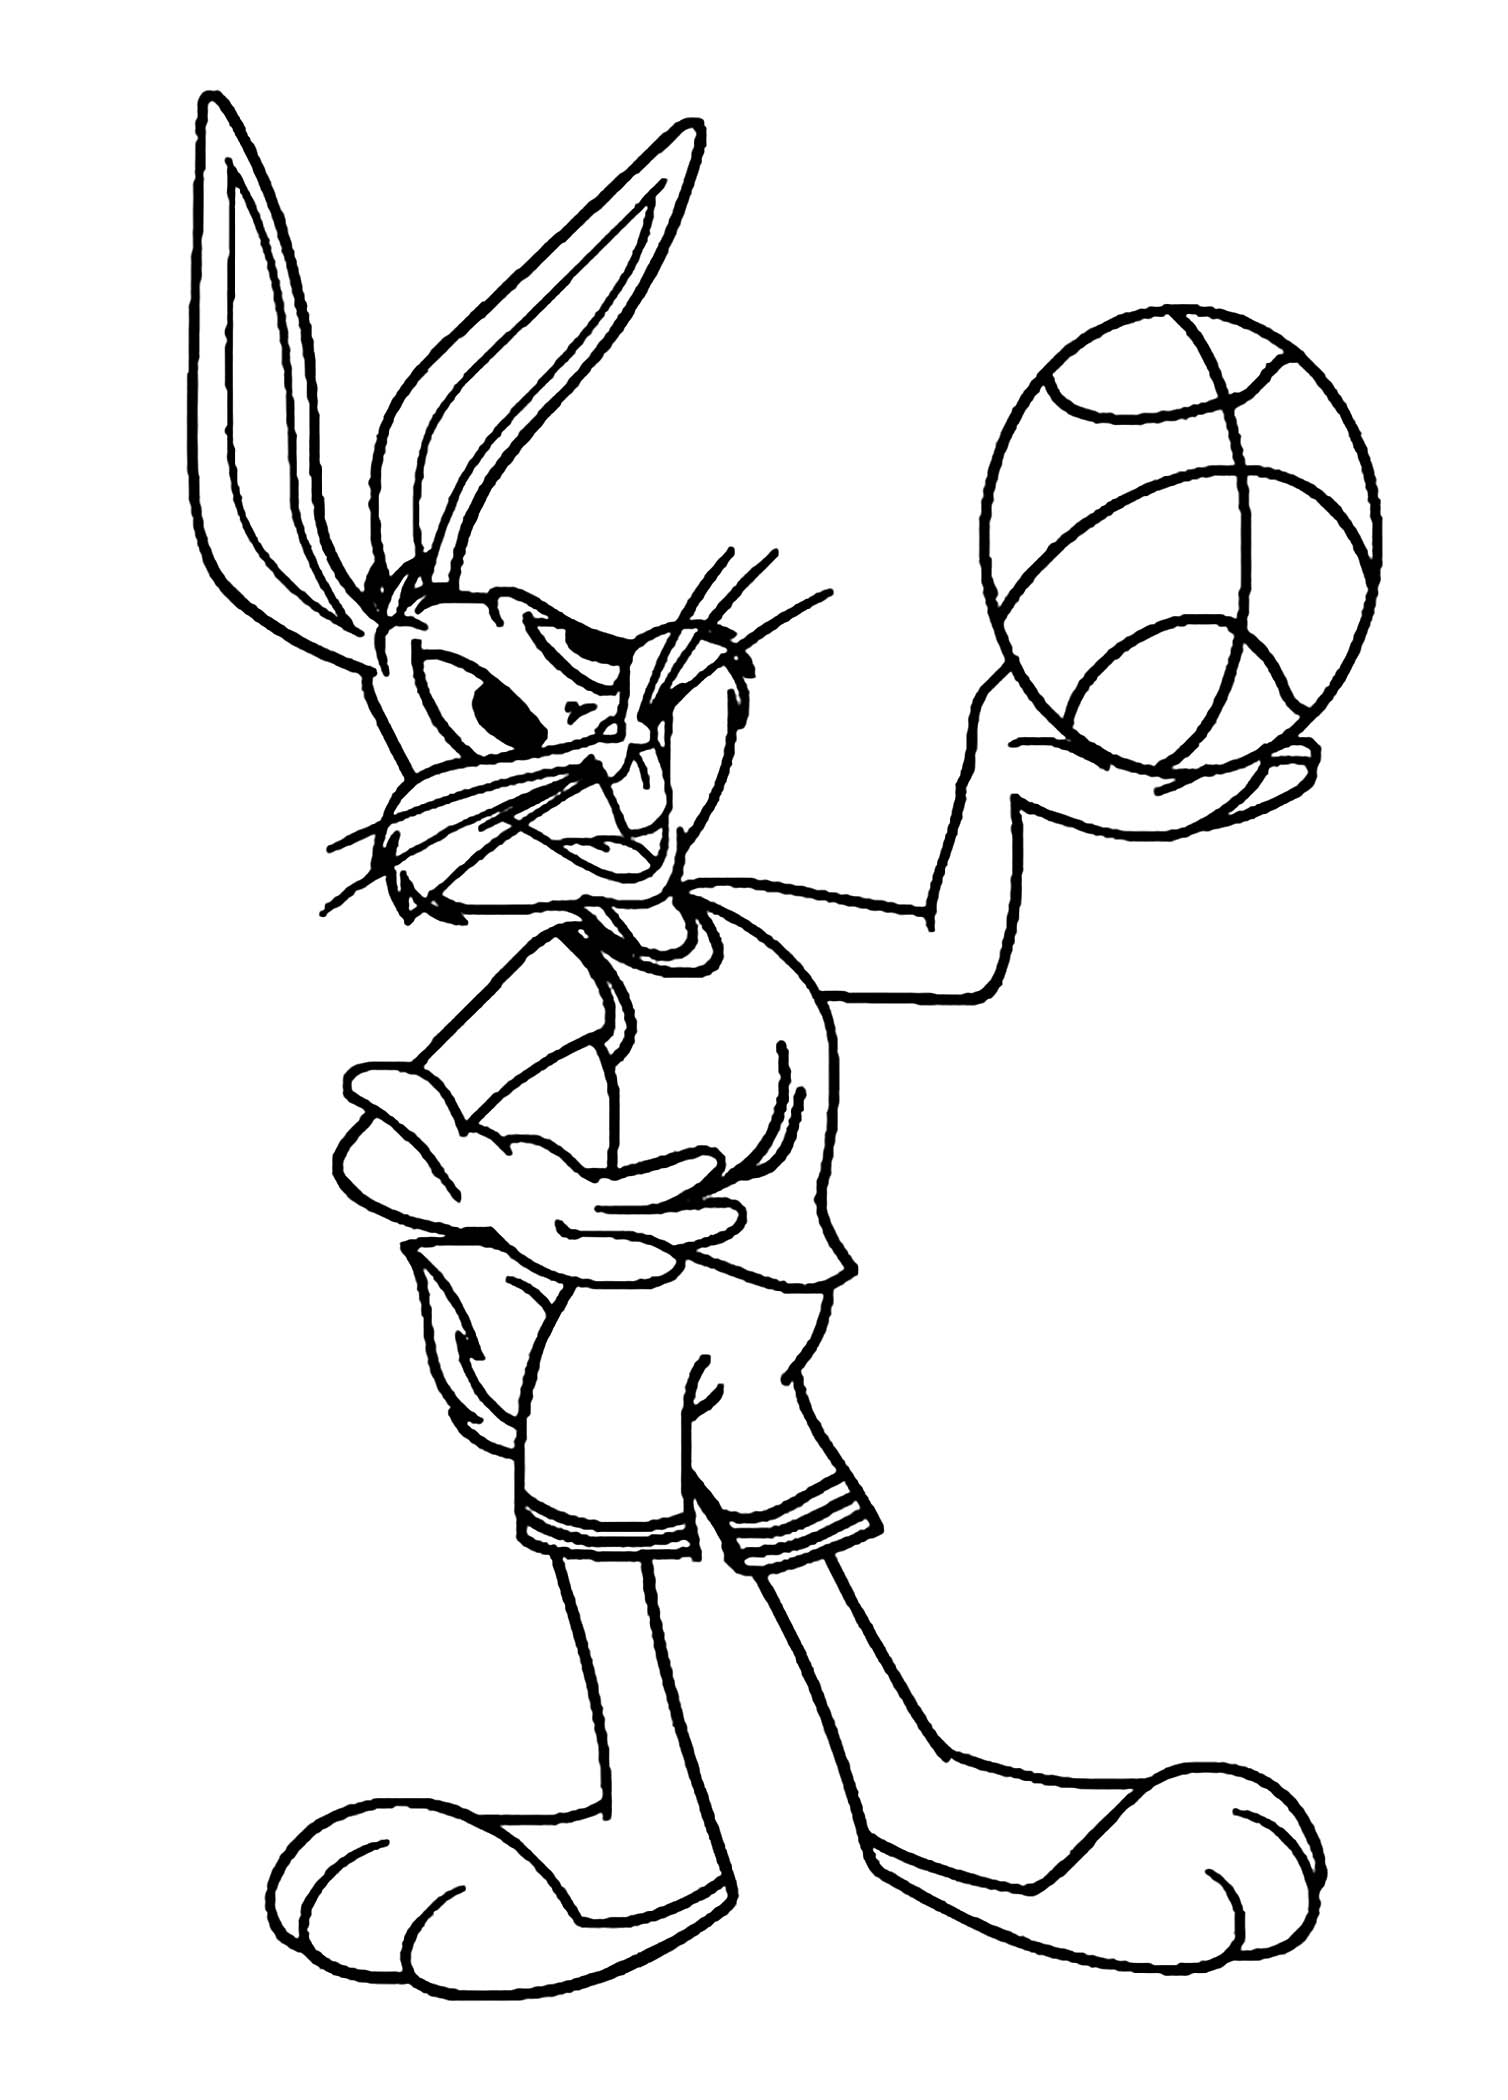 Basketball Coloring Pages.